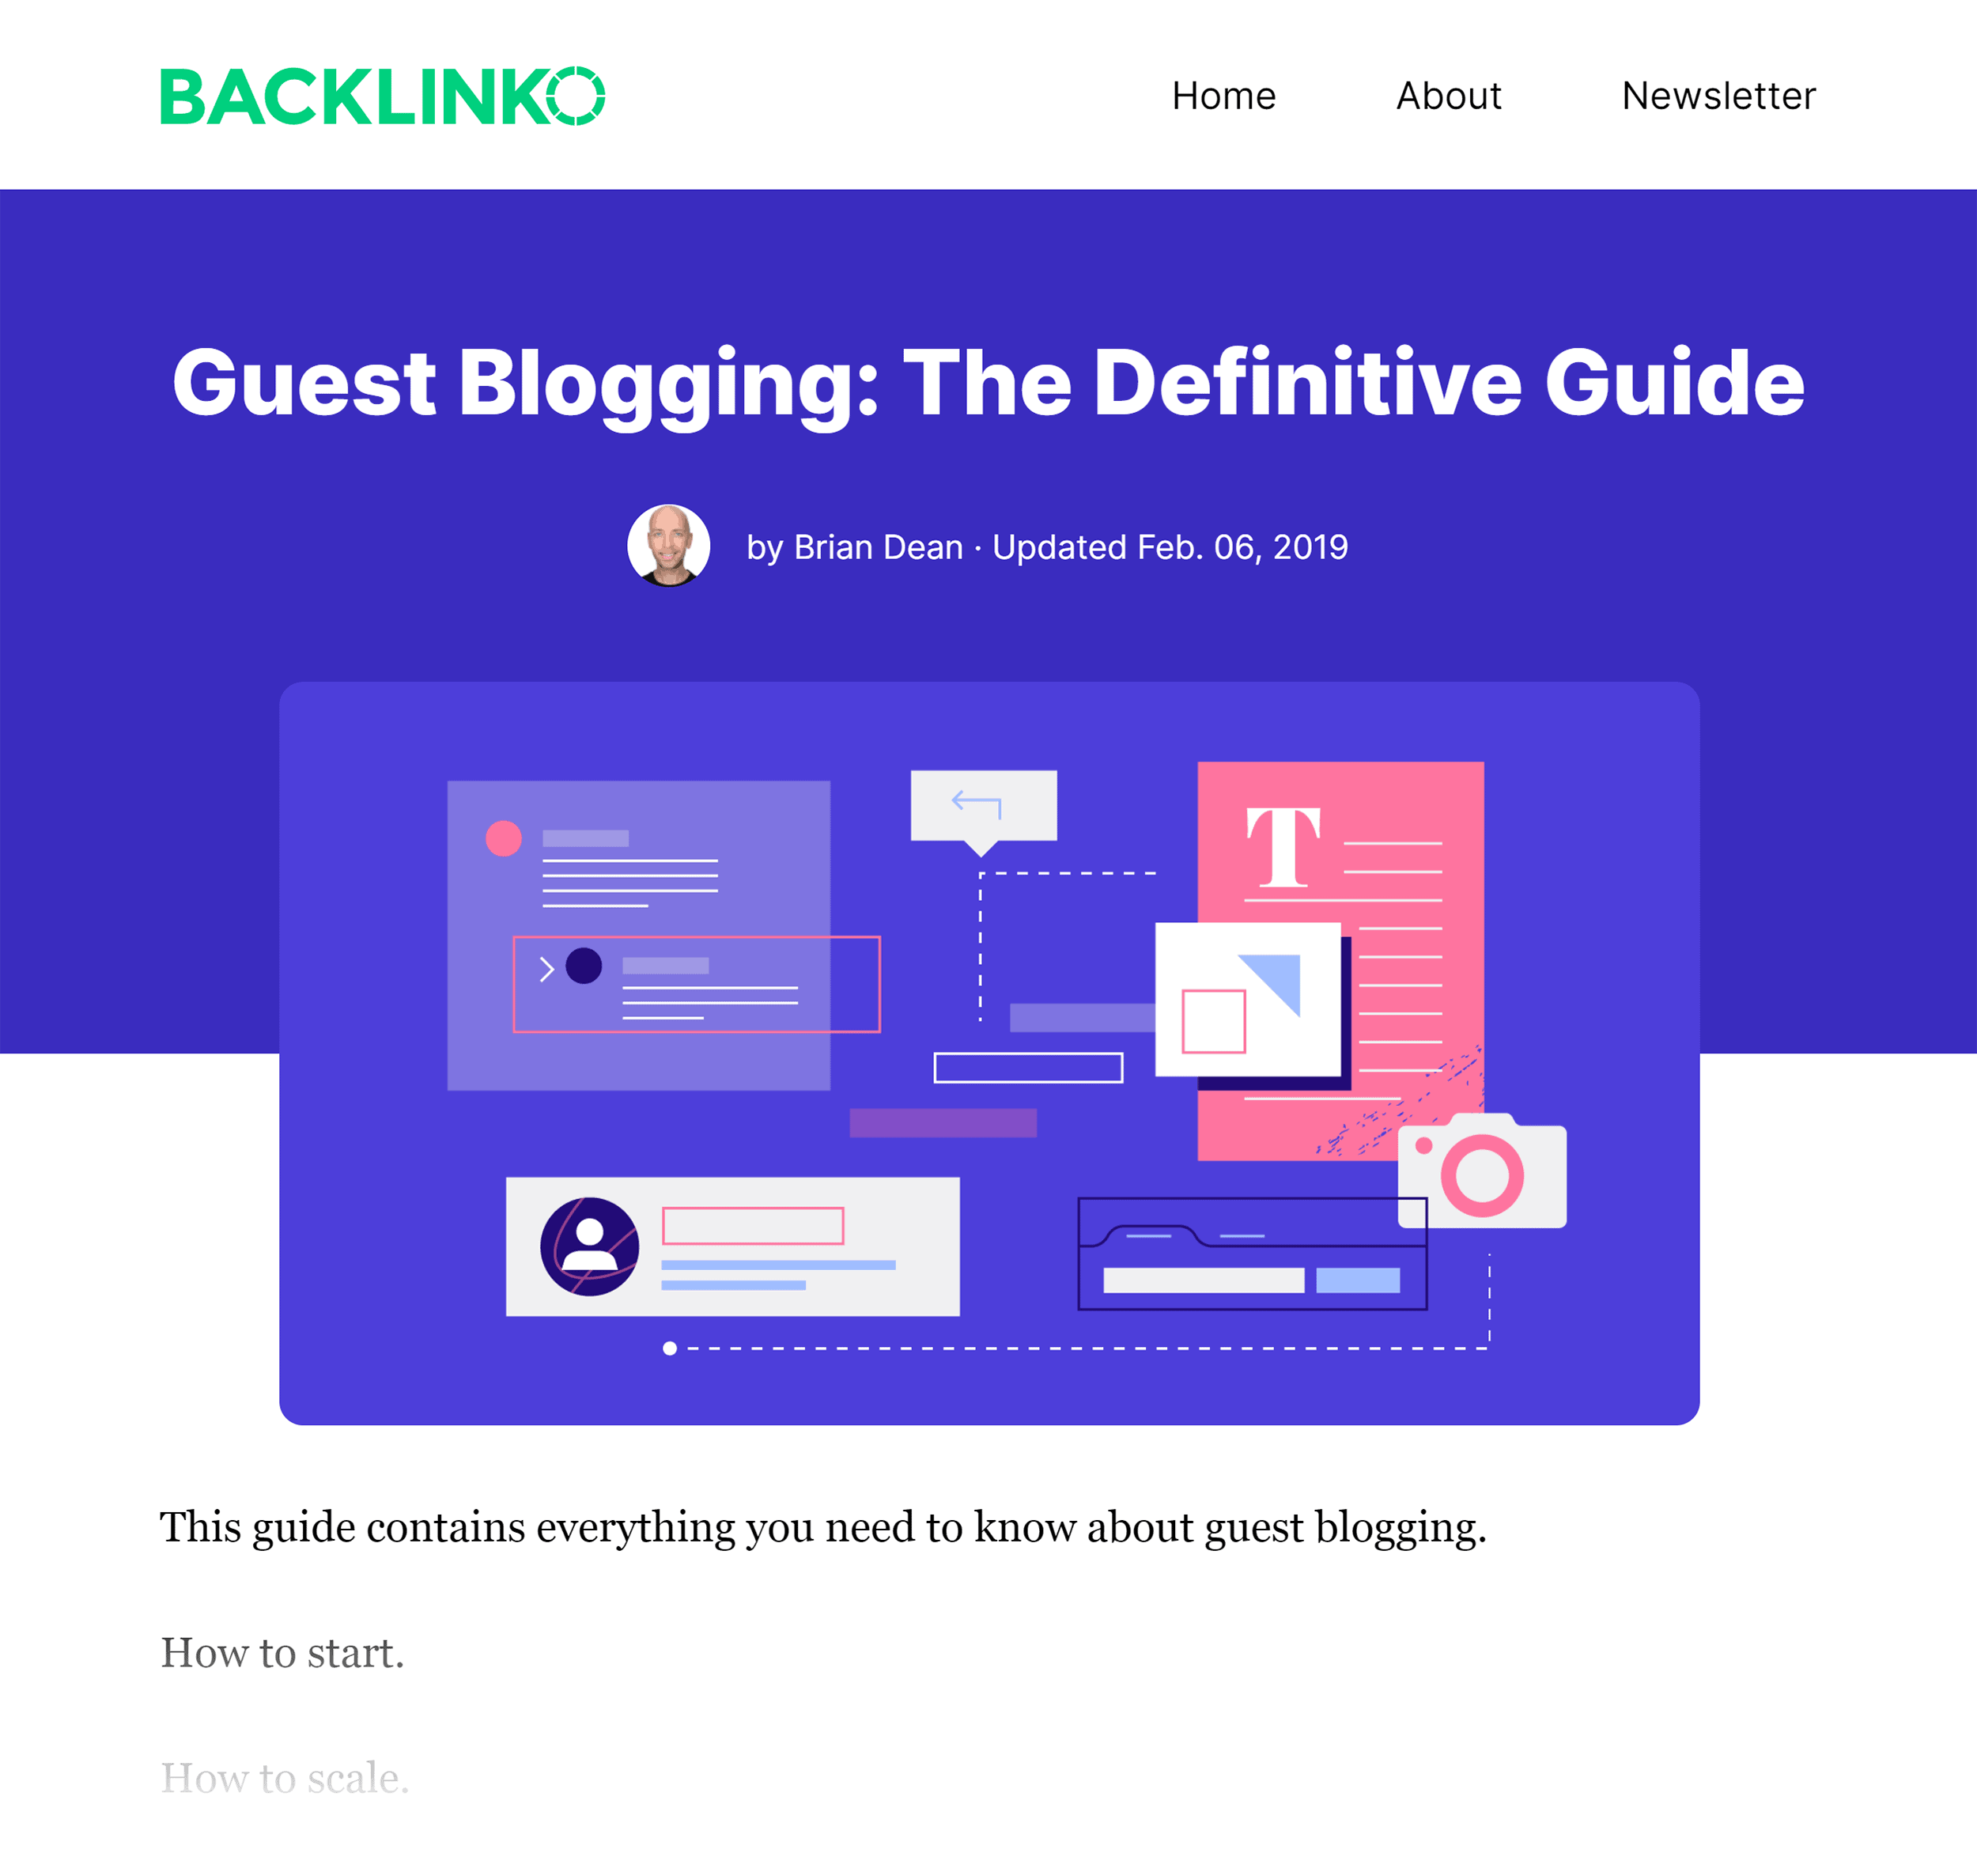 Backlinko – The Definitive Guide To Guest Blogging